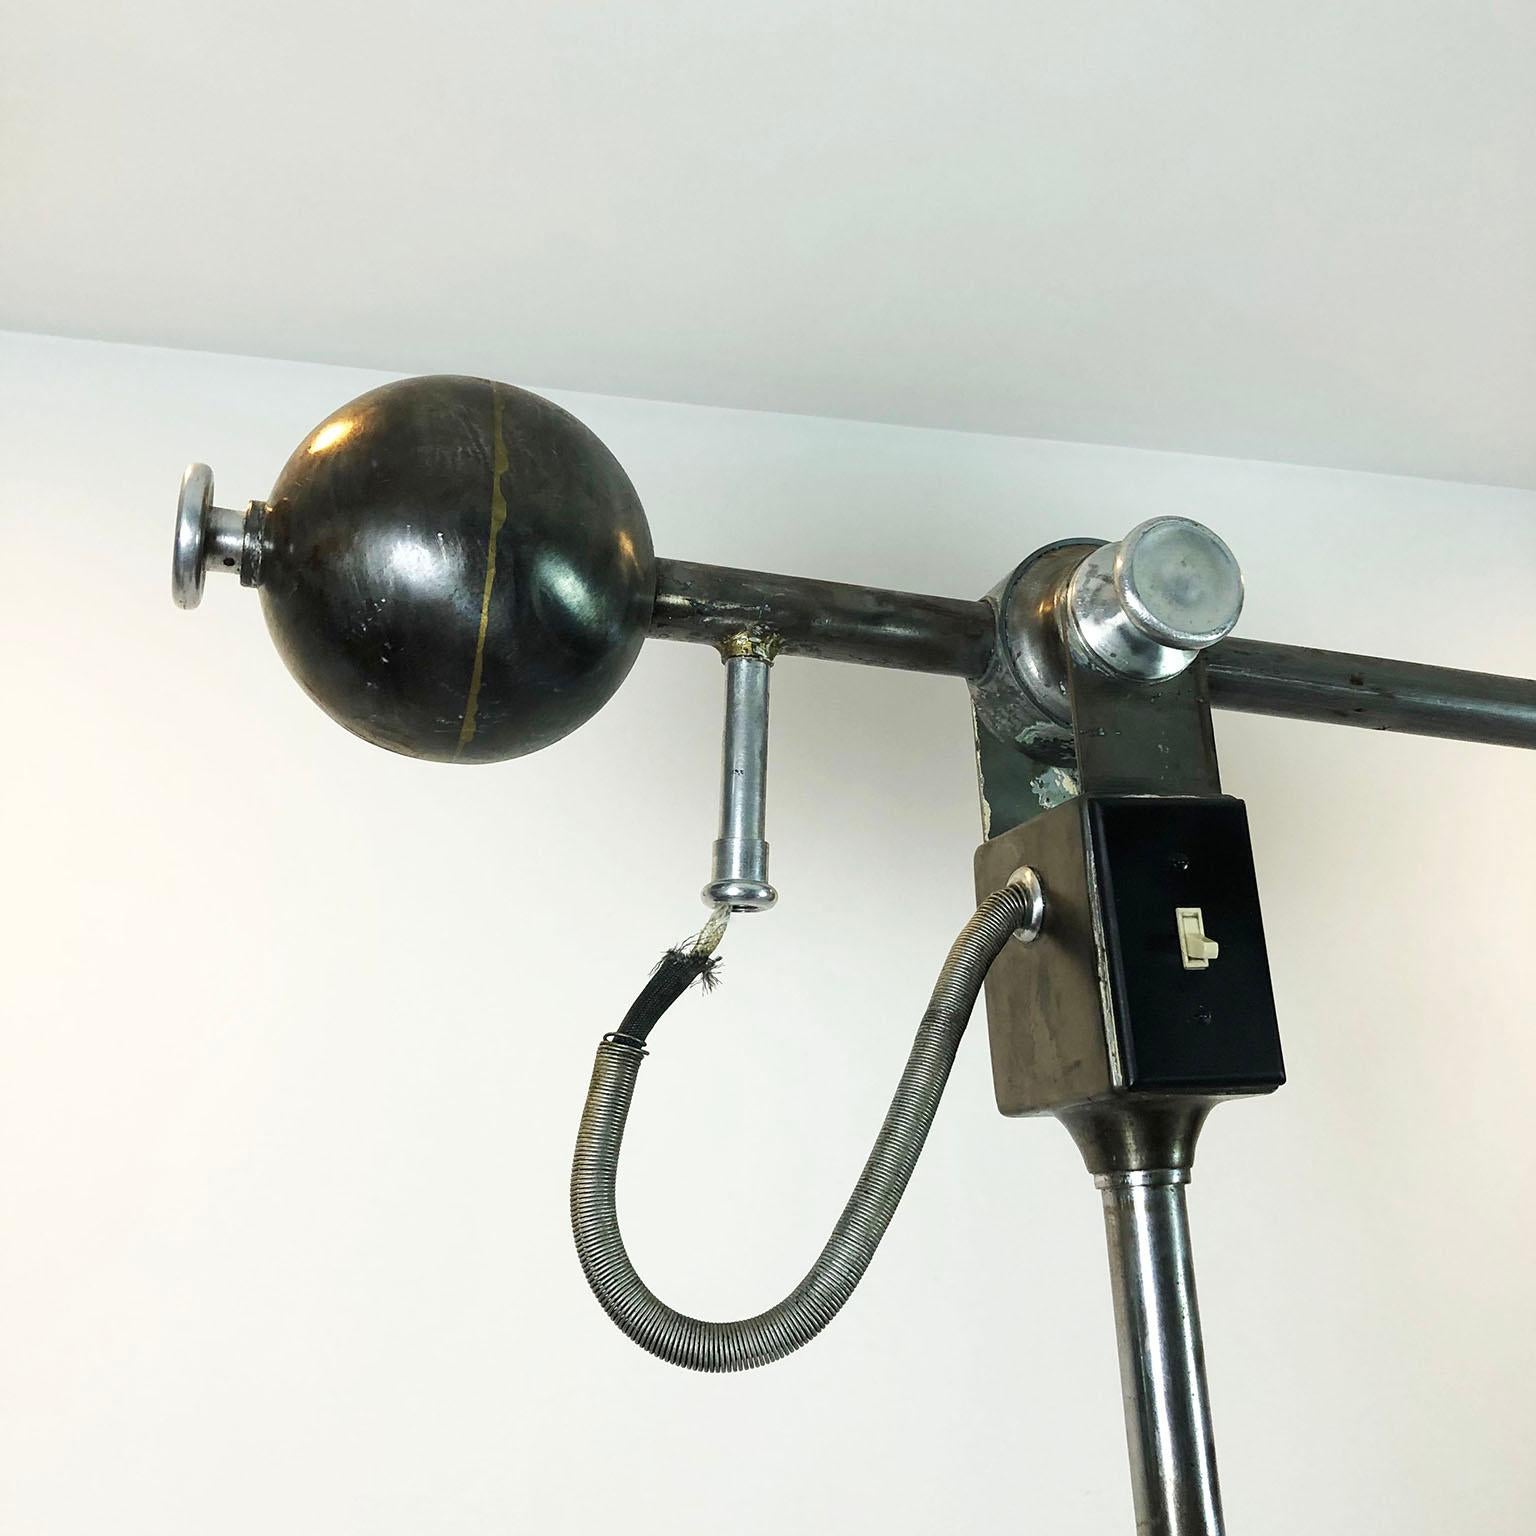 We offer this big size hospital surgery lamp by The Ohio Chemical & MFG. Co, circa 1920. The light works and the lamps can move in different positions.